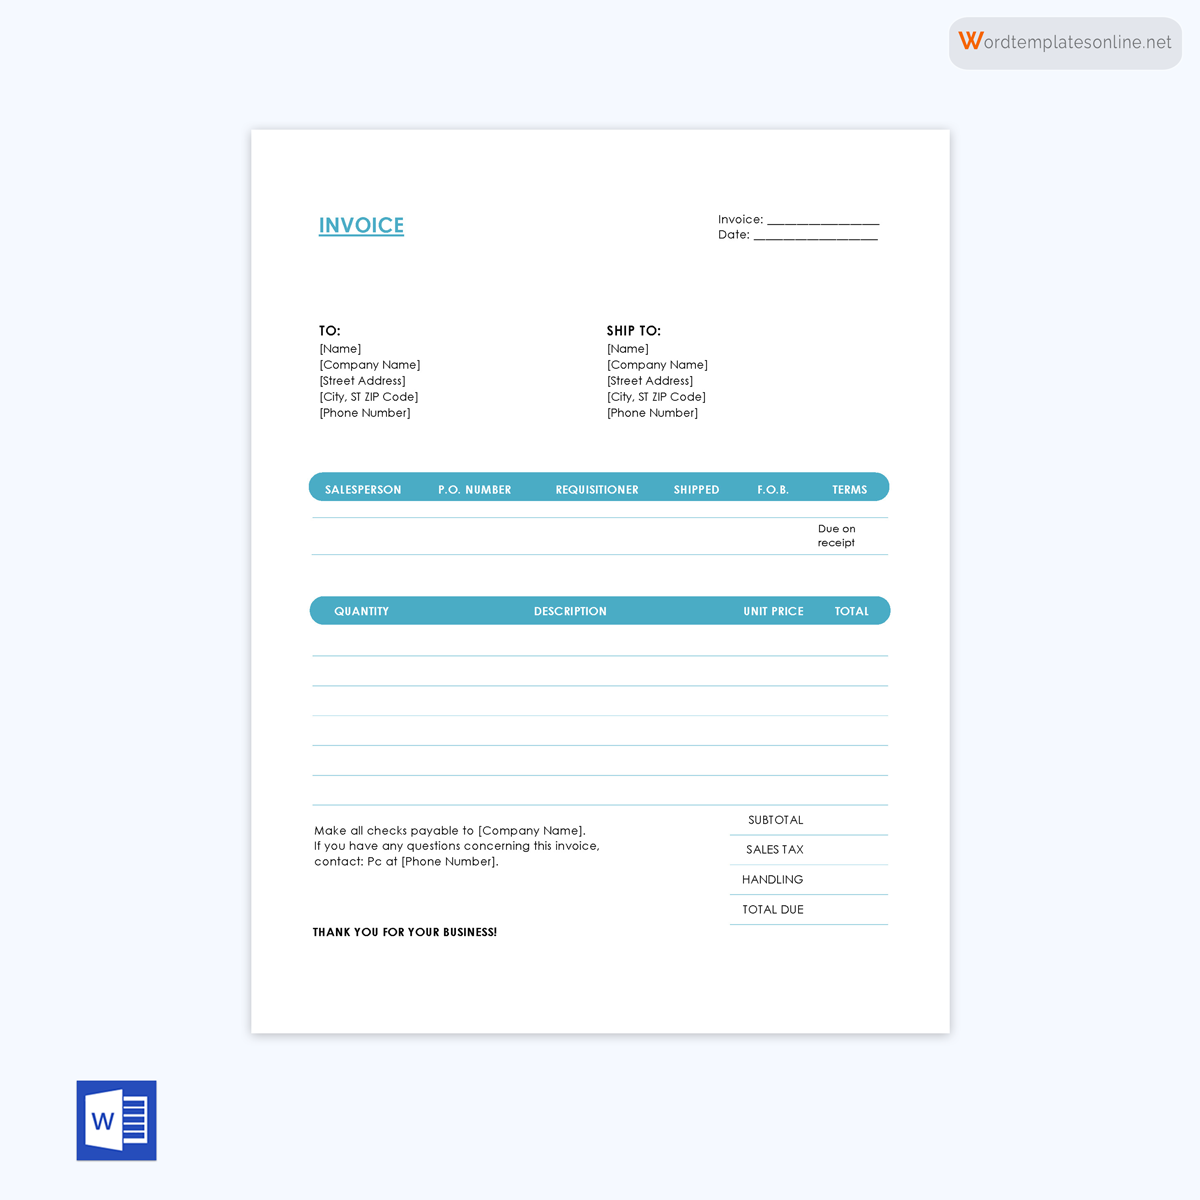 Free invoice template with Word